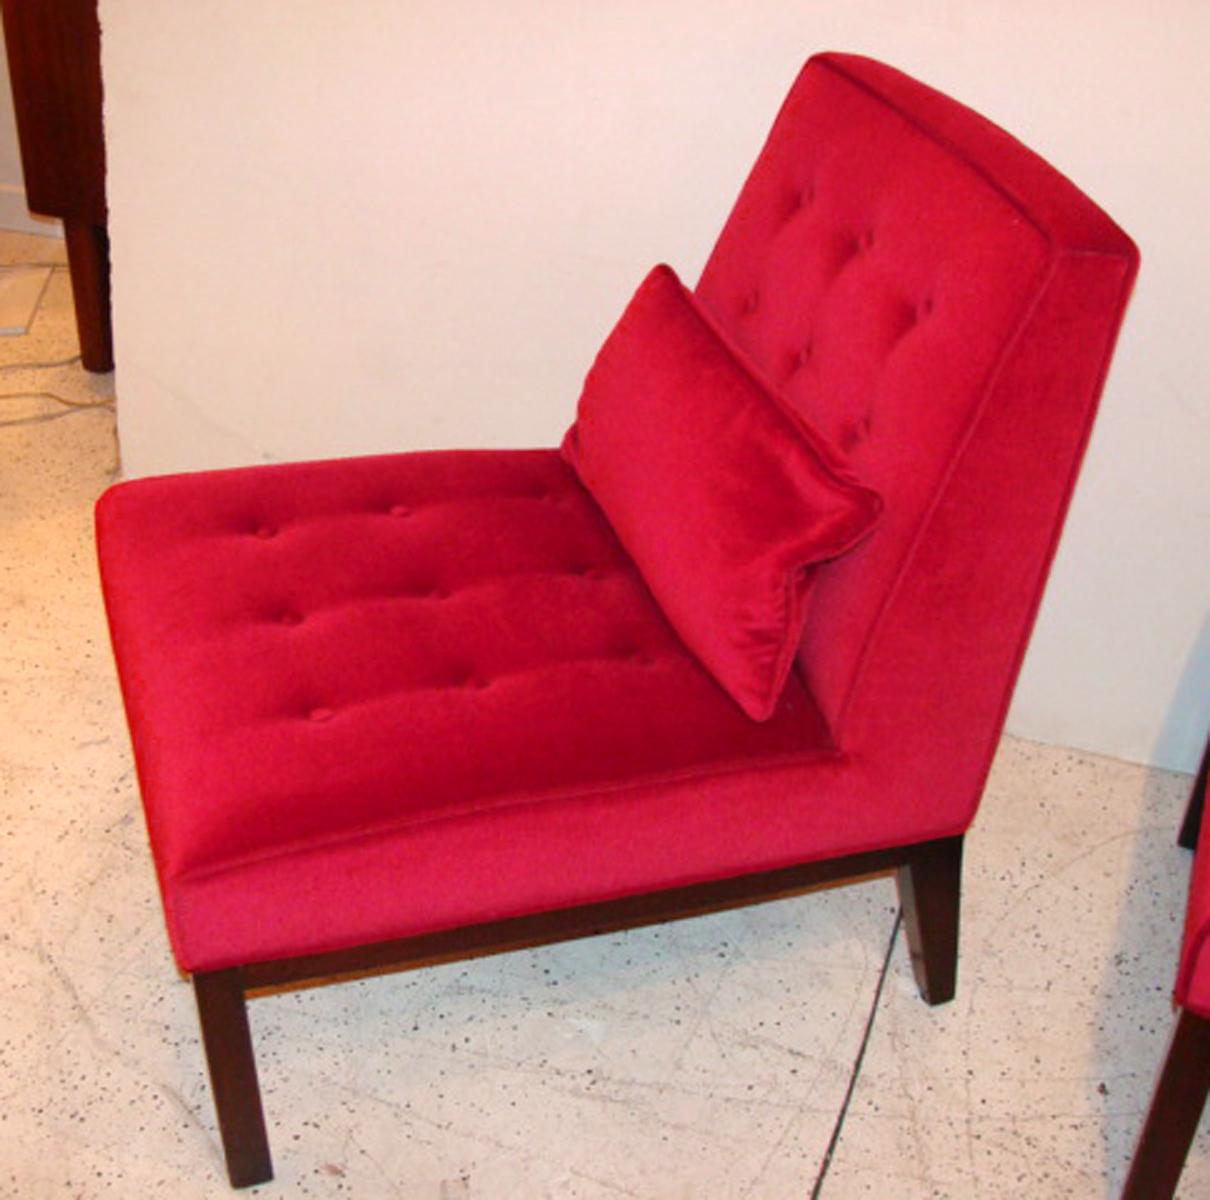 Classic Edward Wormley midcentury lounge chairs re-upholstered in red
Mohair (Pollack). Very elegant design which complements a wide range of
interior styles.